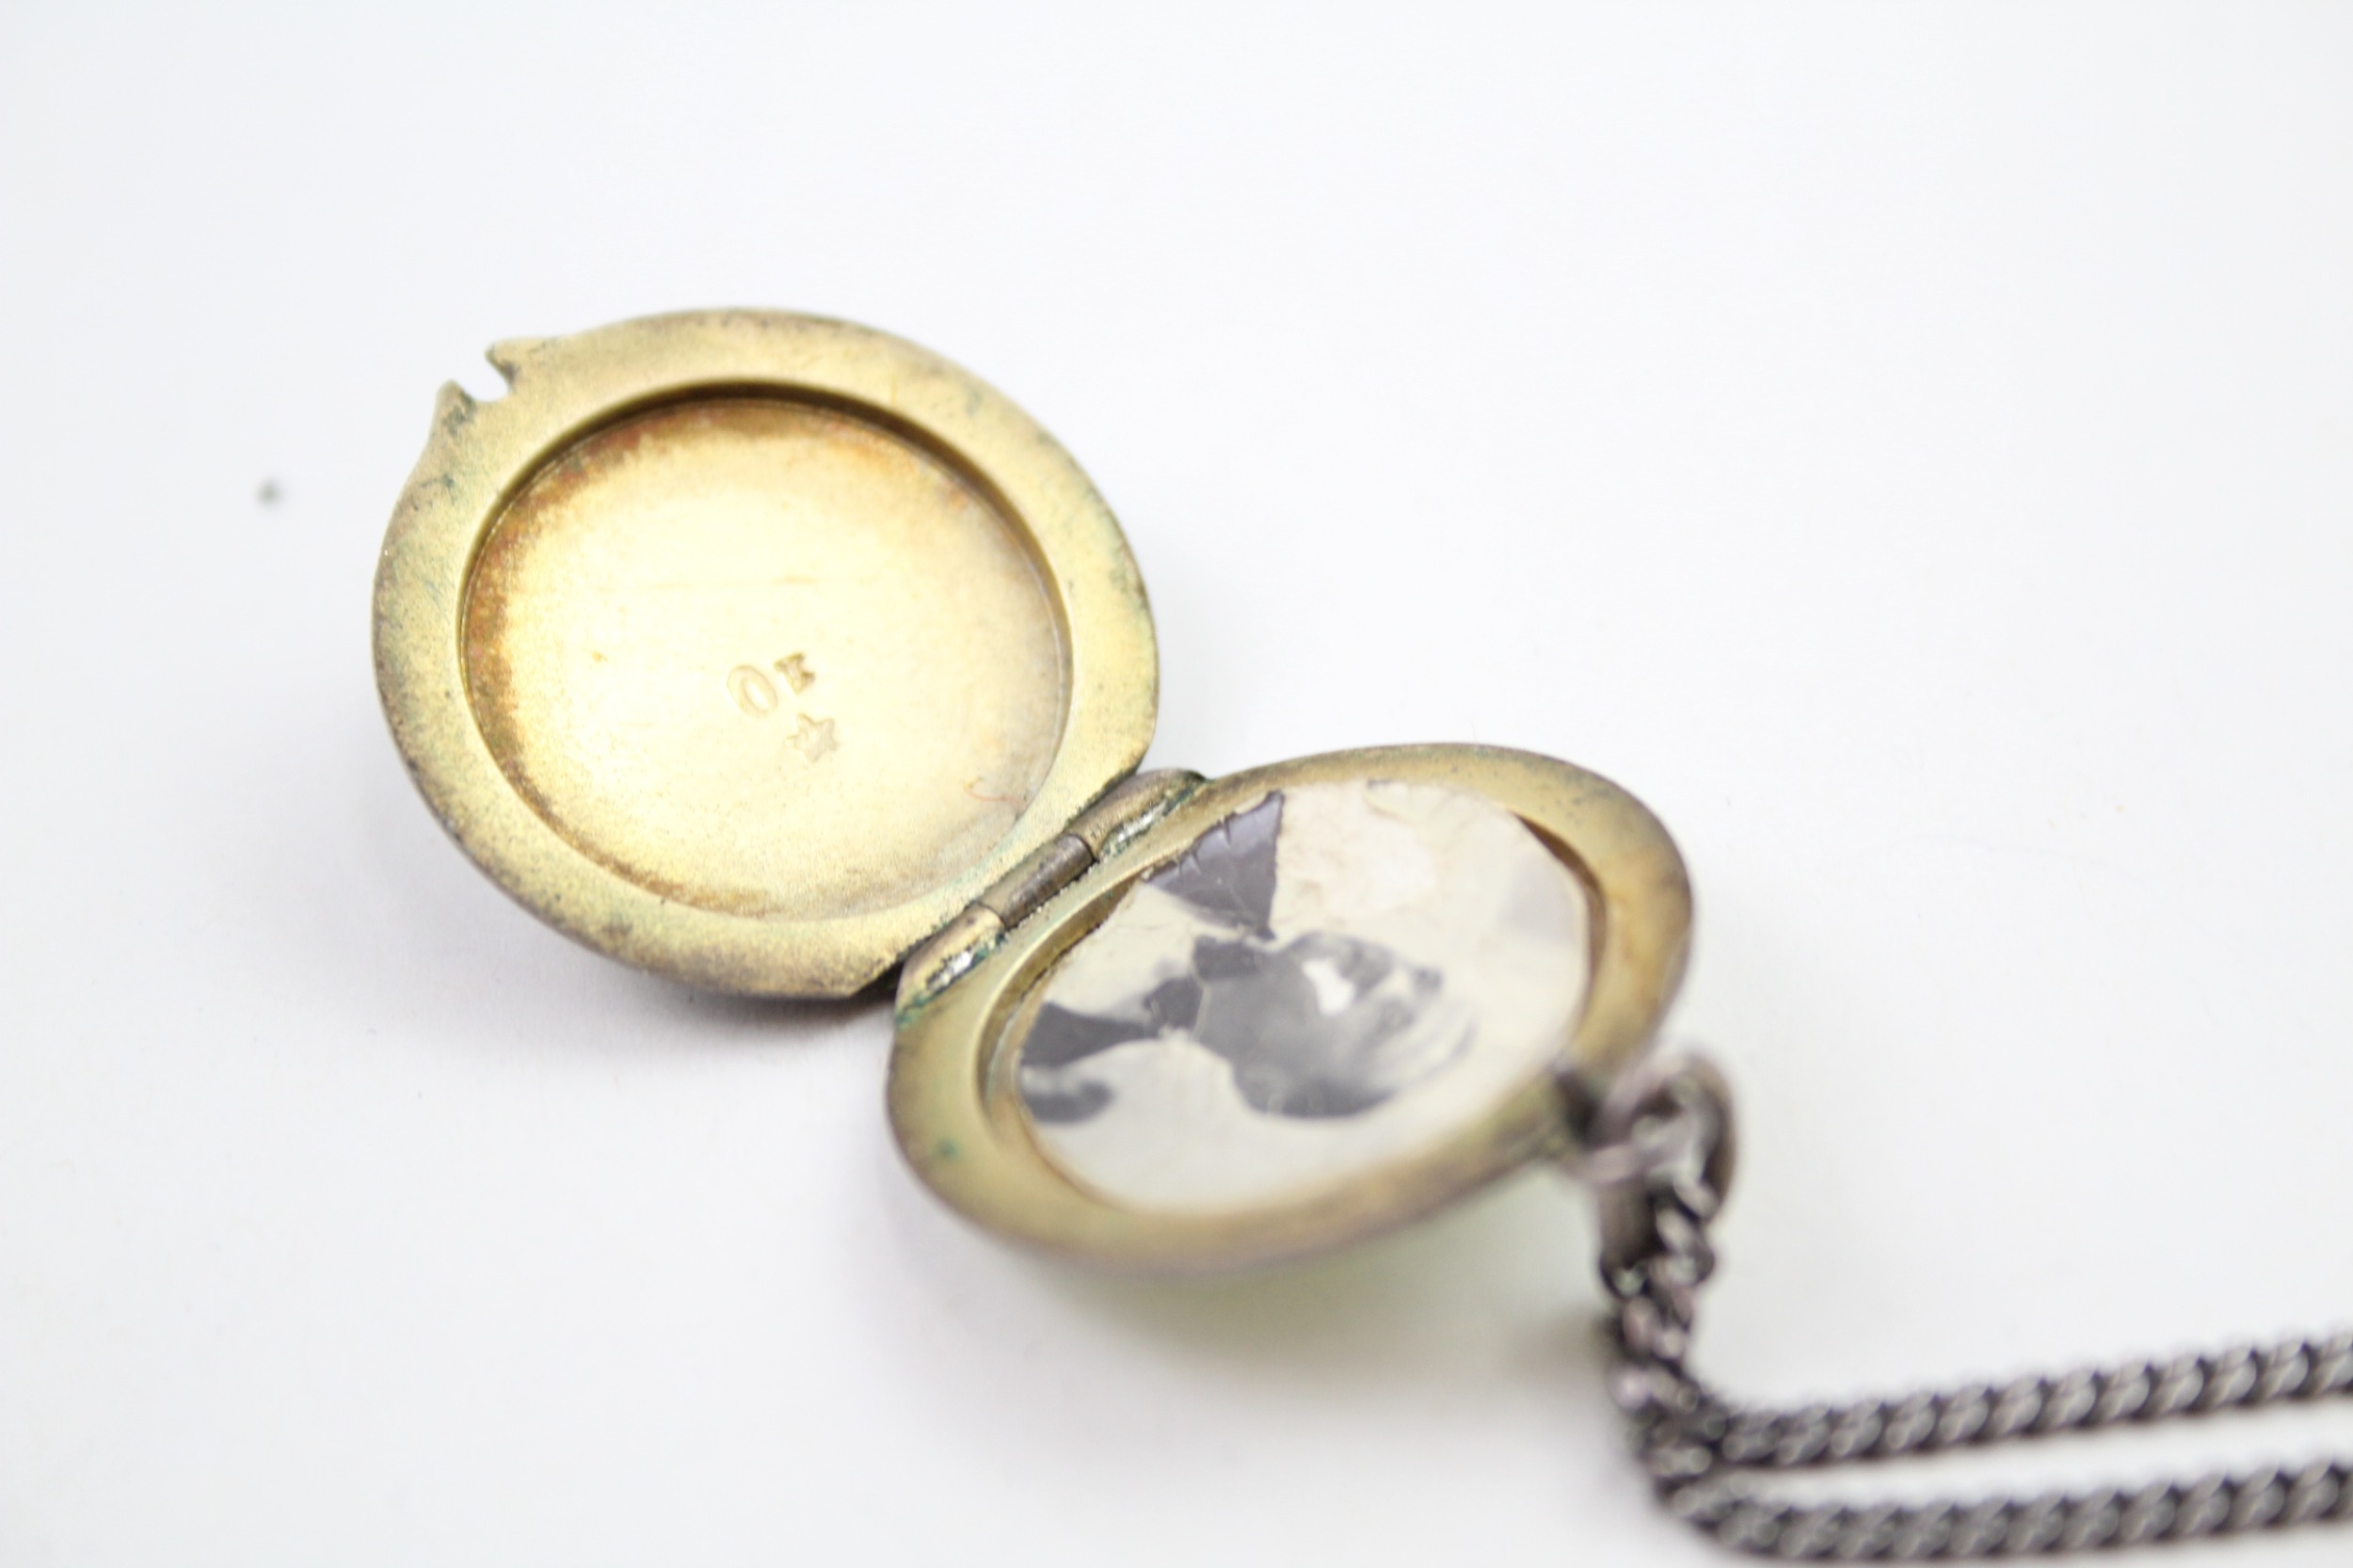 A silver floral guilloche enamel locket with chain (17g) - Image 4 of 5